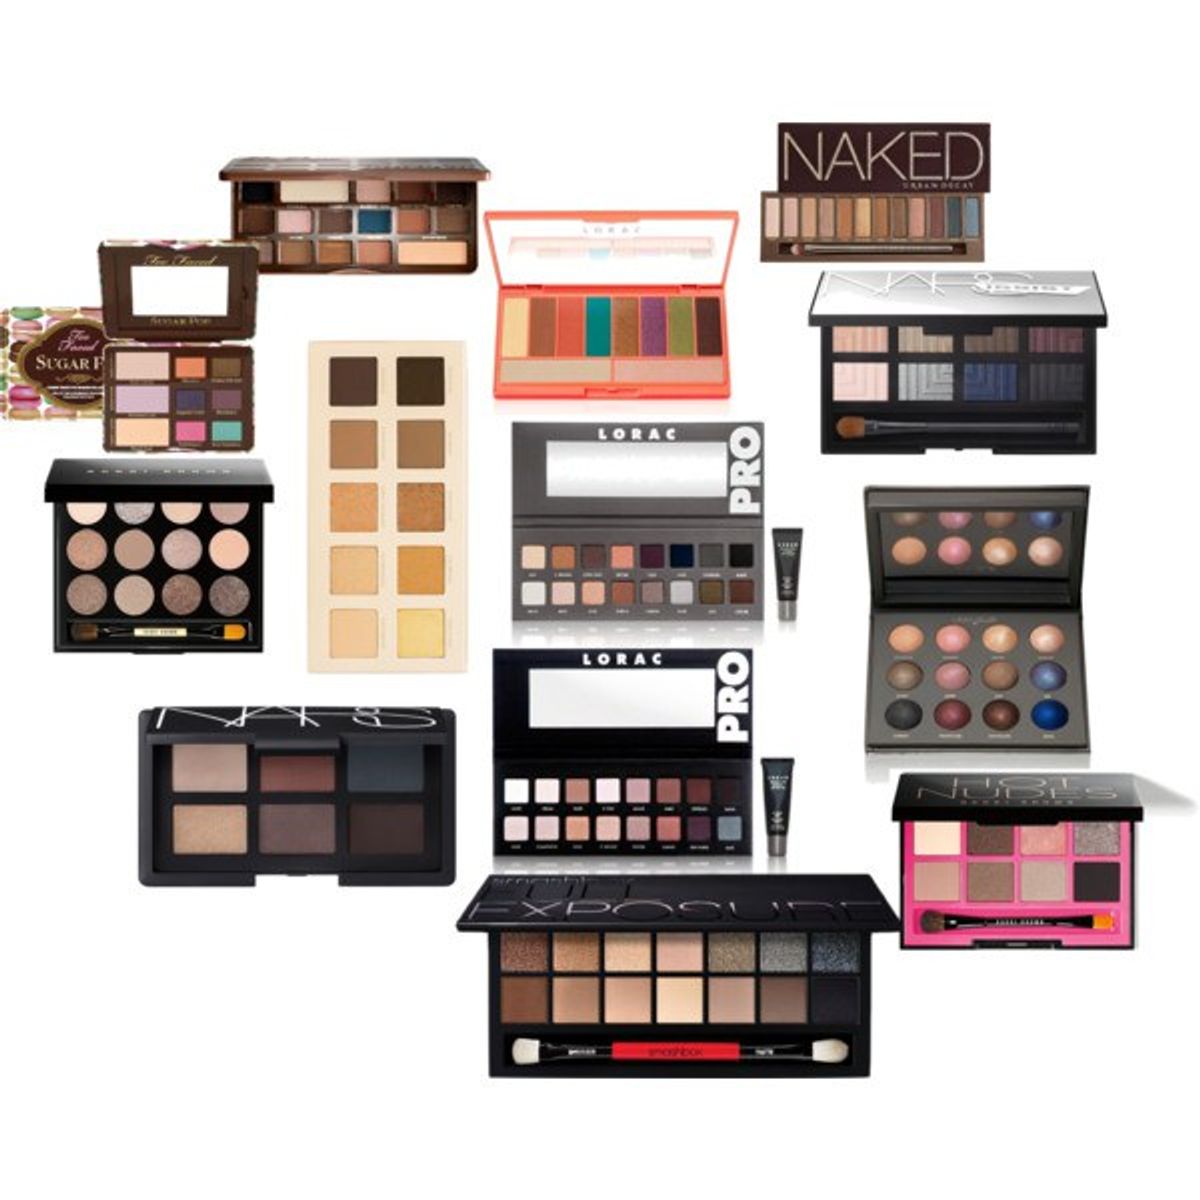 4 Eyeshadow Palettes You Need to Own